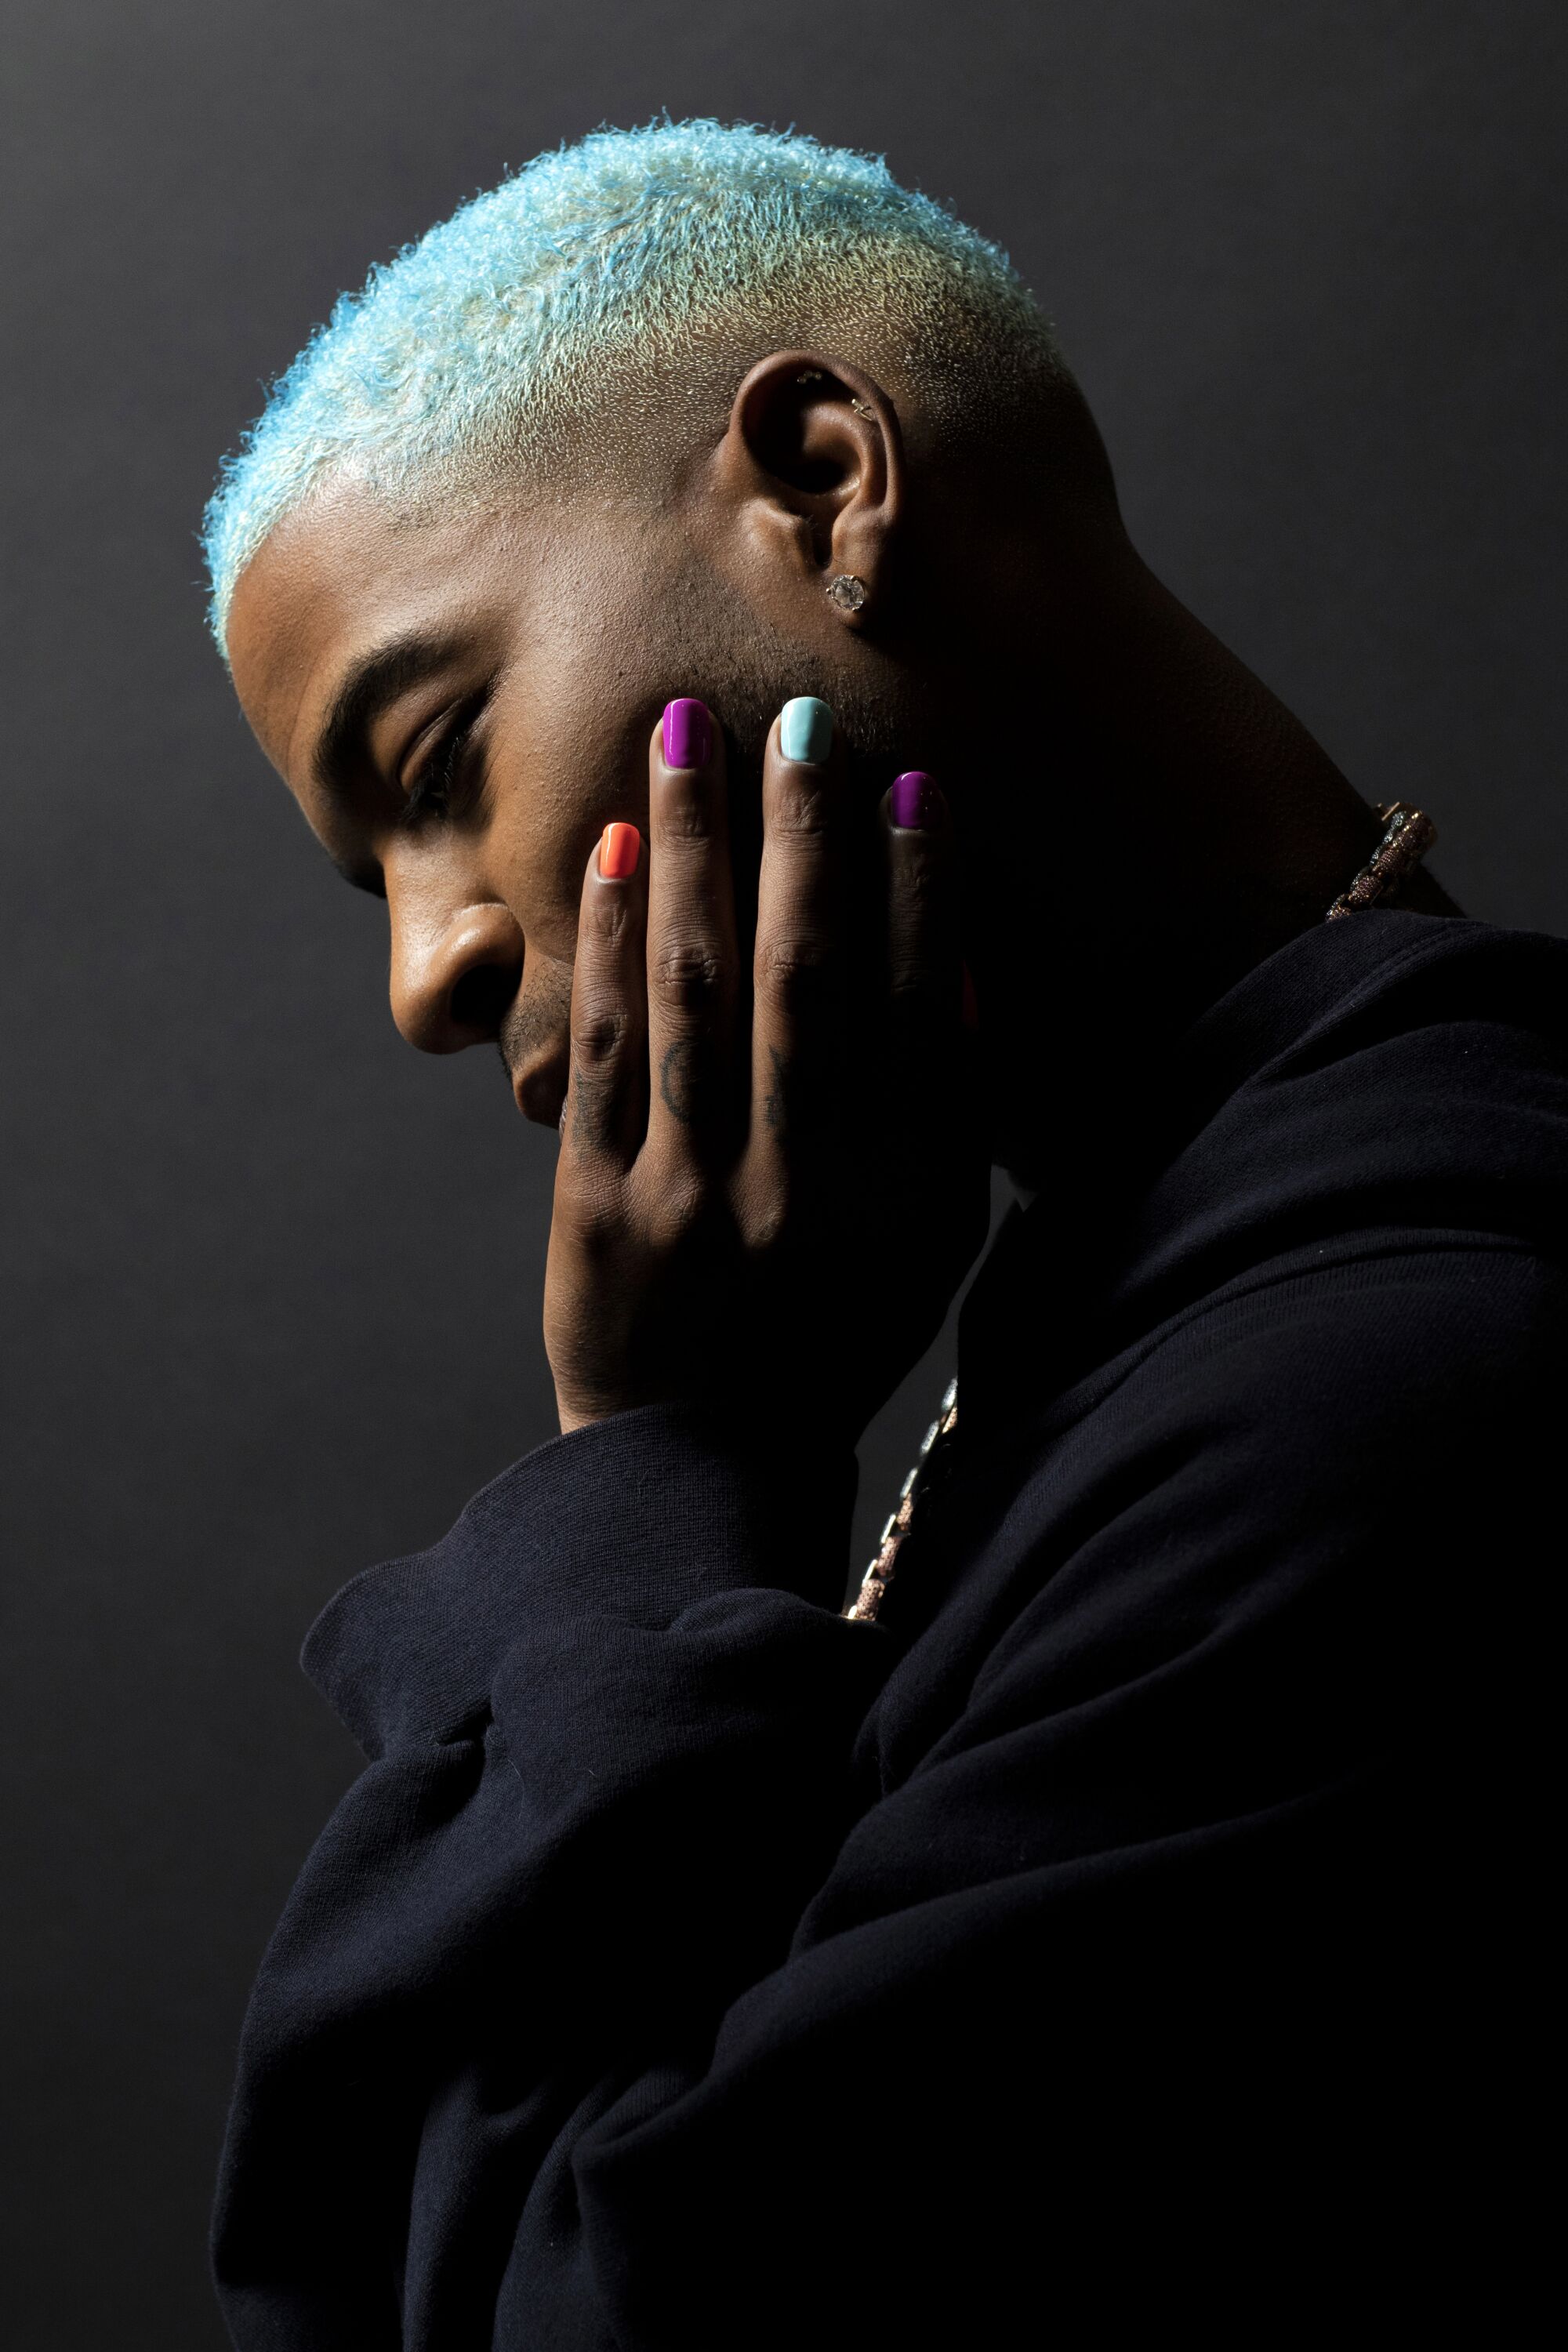 A man with blue hair and painted nails poses for a portrait on a dark backdrop.